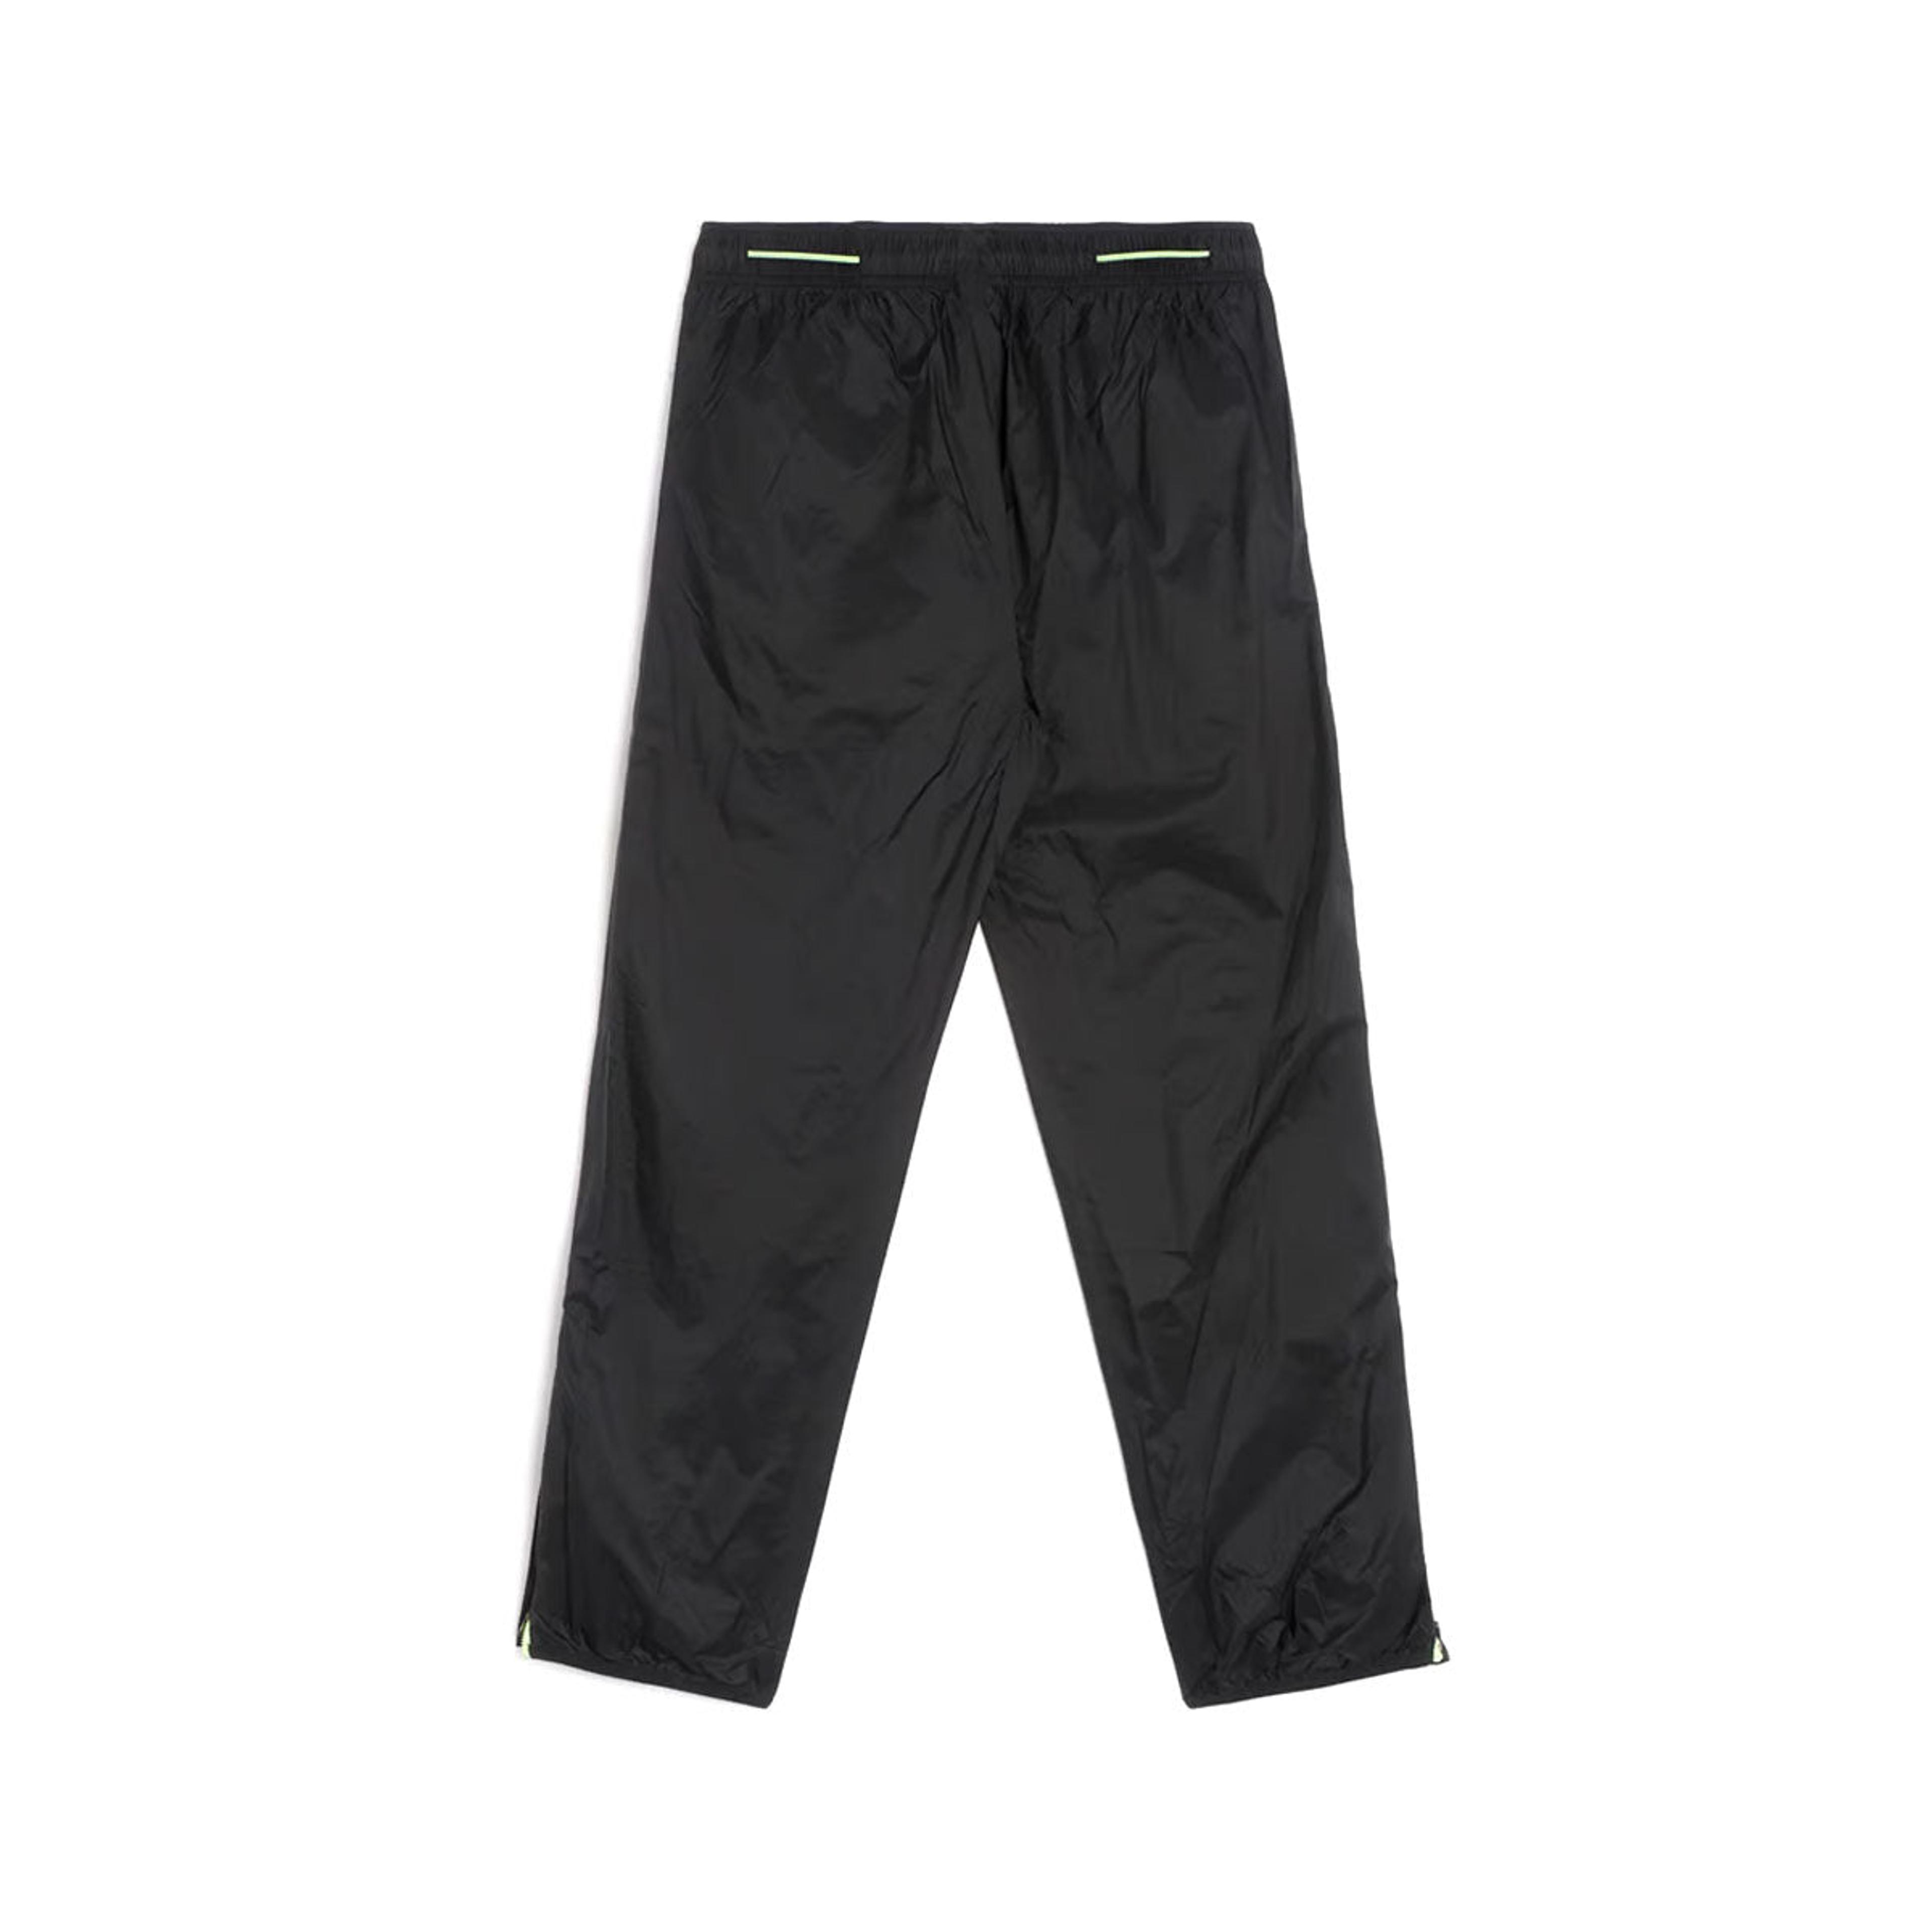 Alternate View 3 of Nike Men's ACG "Cinder Cone" Windshell Trousers